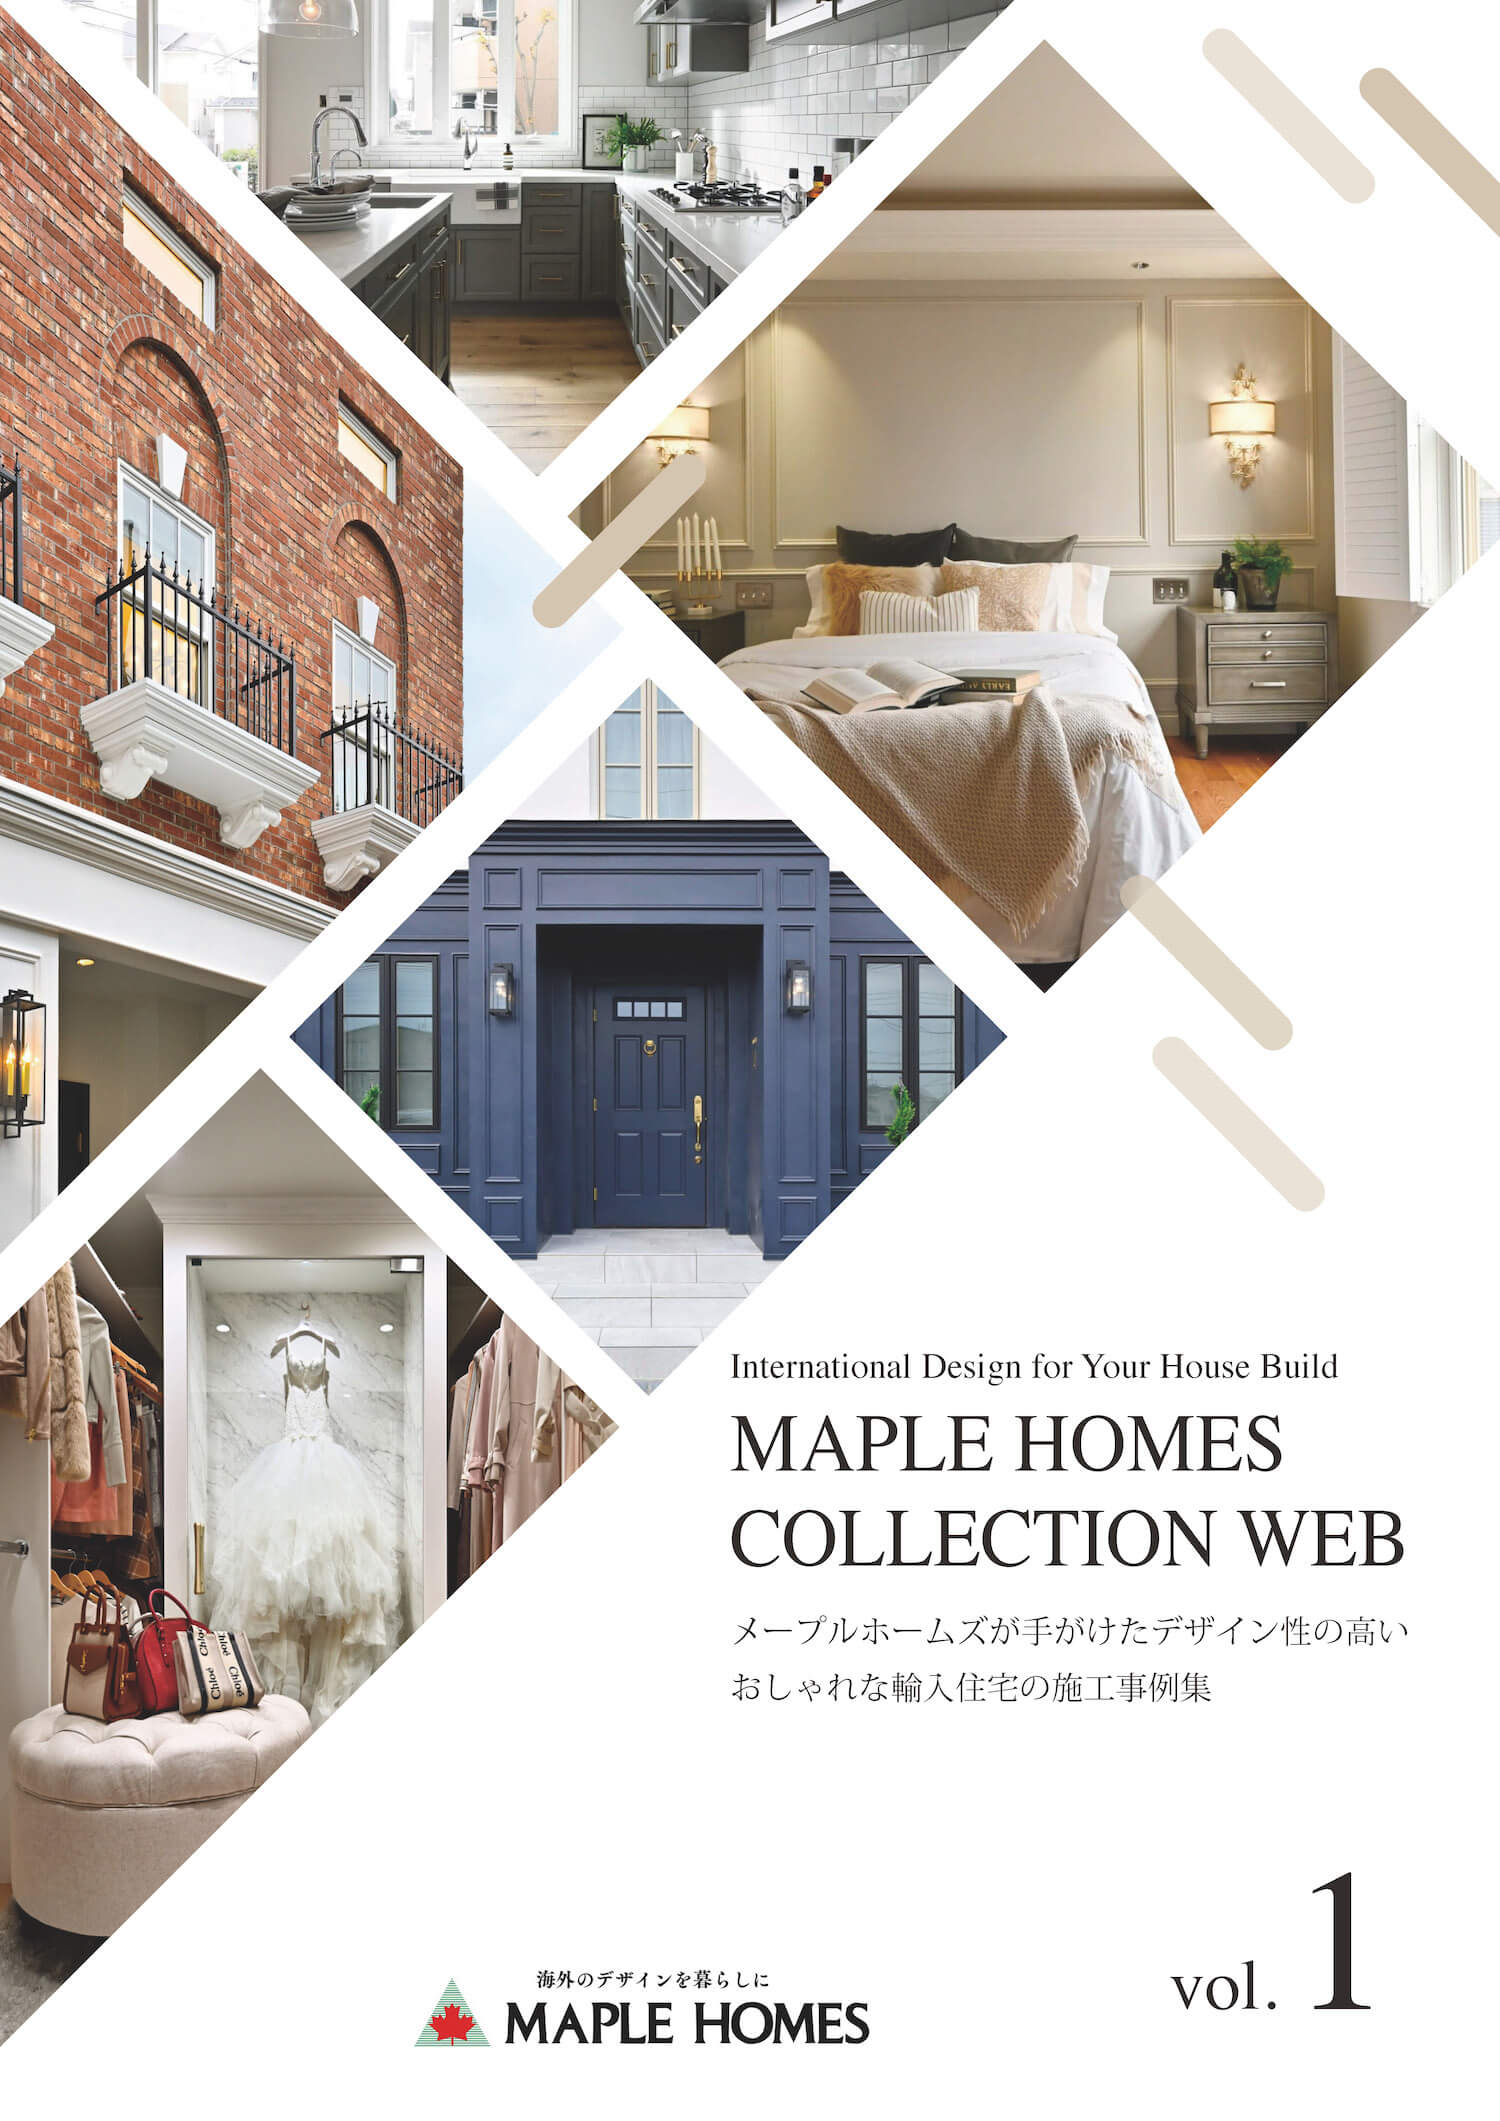 MAPLE HOMES COLLECTION WEB